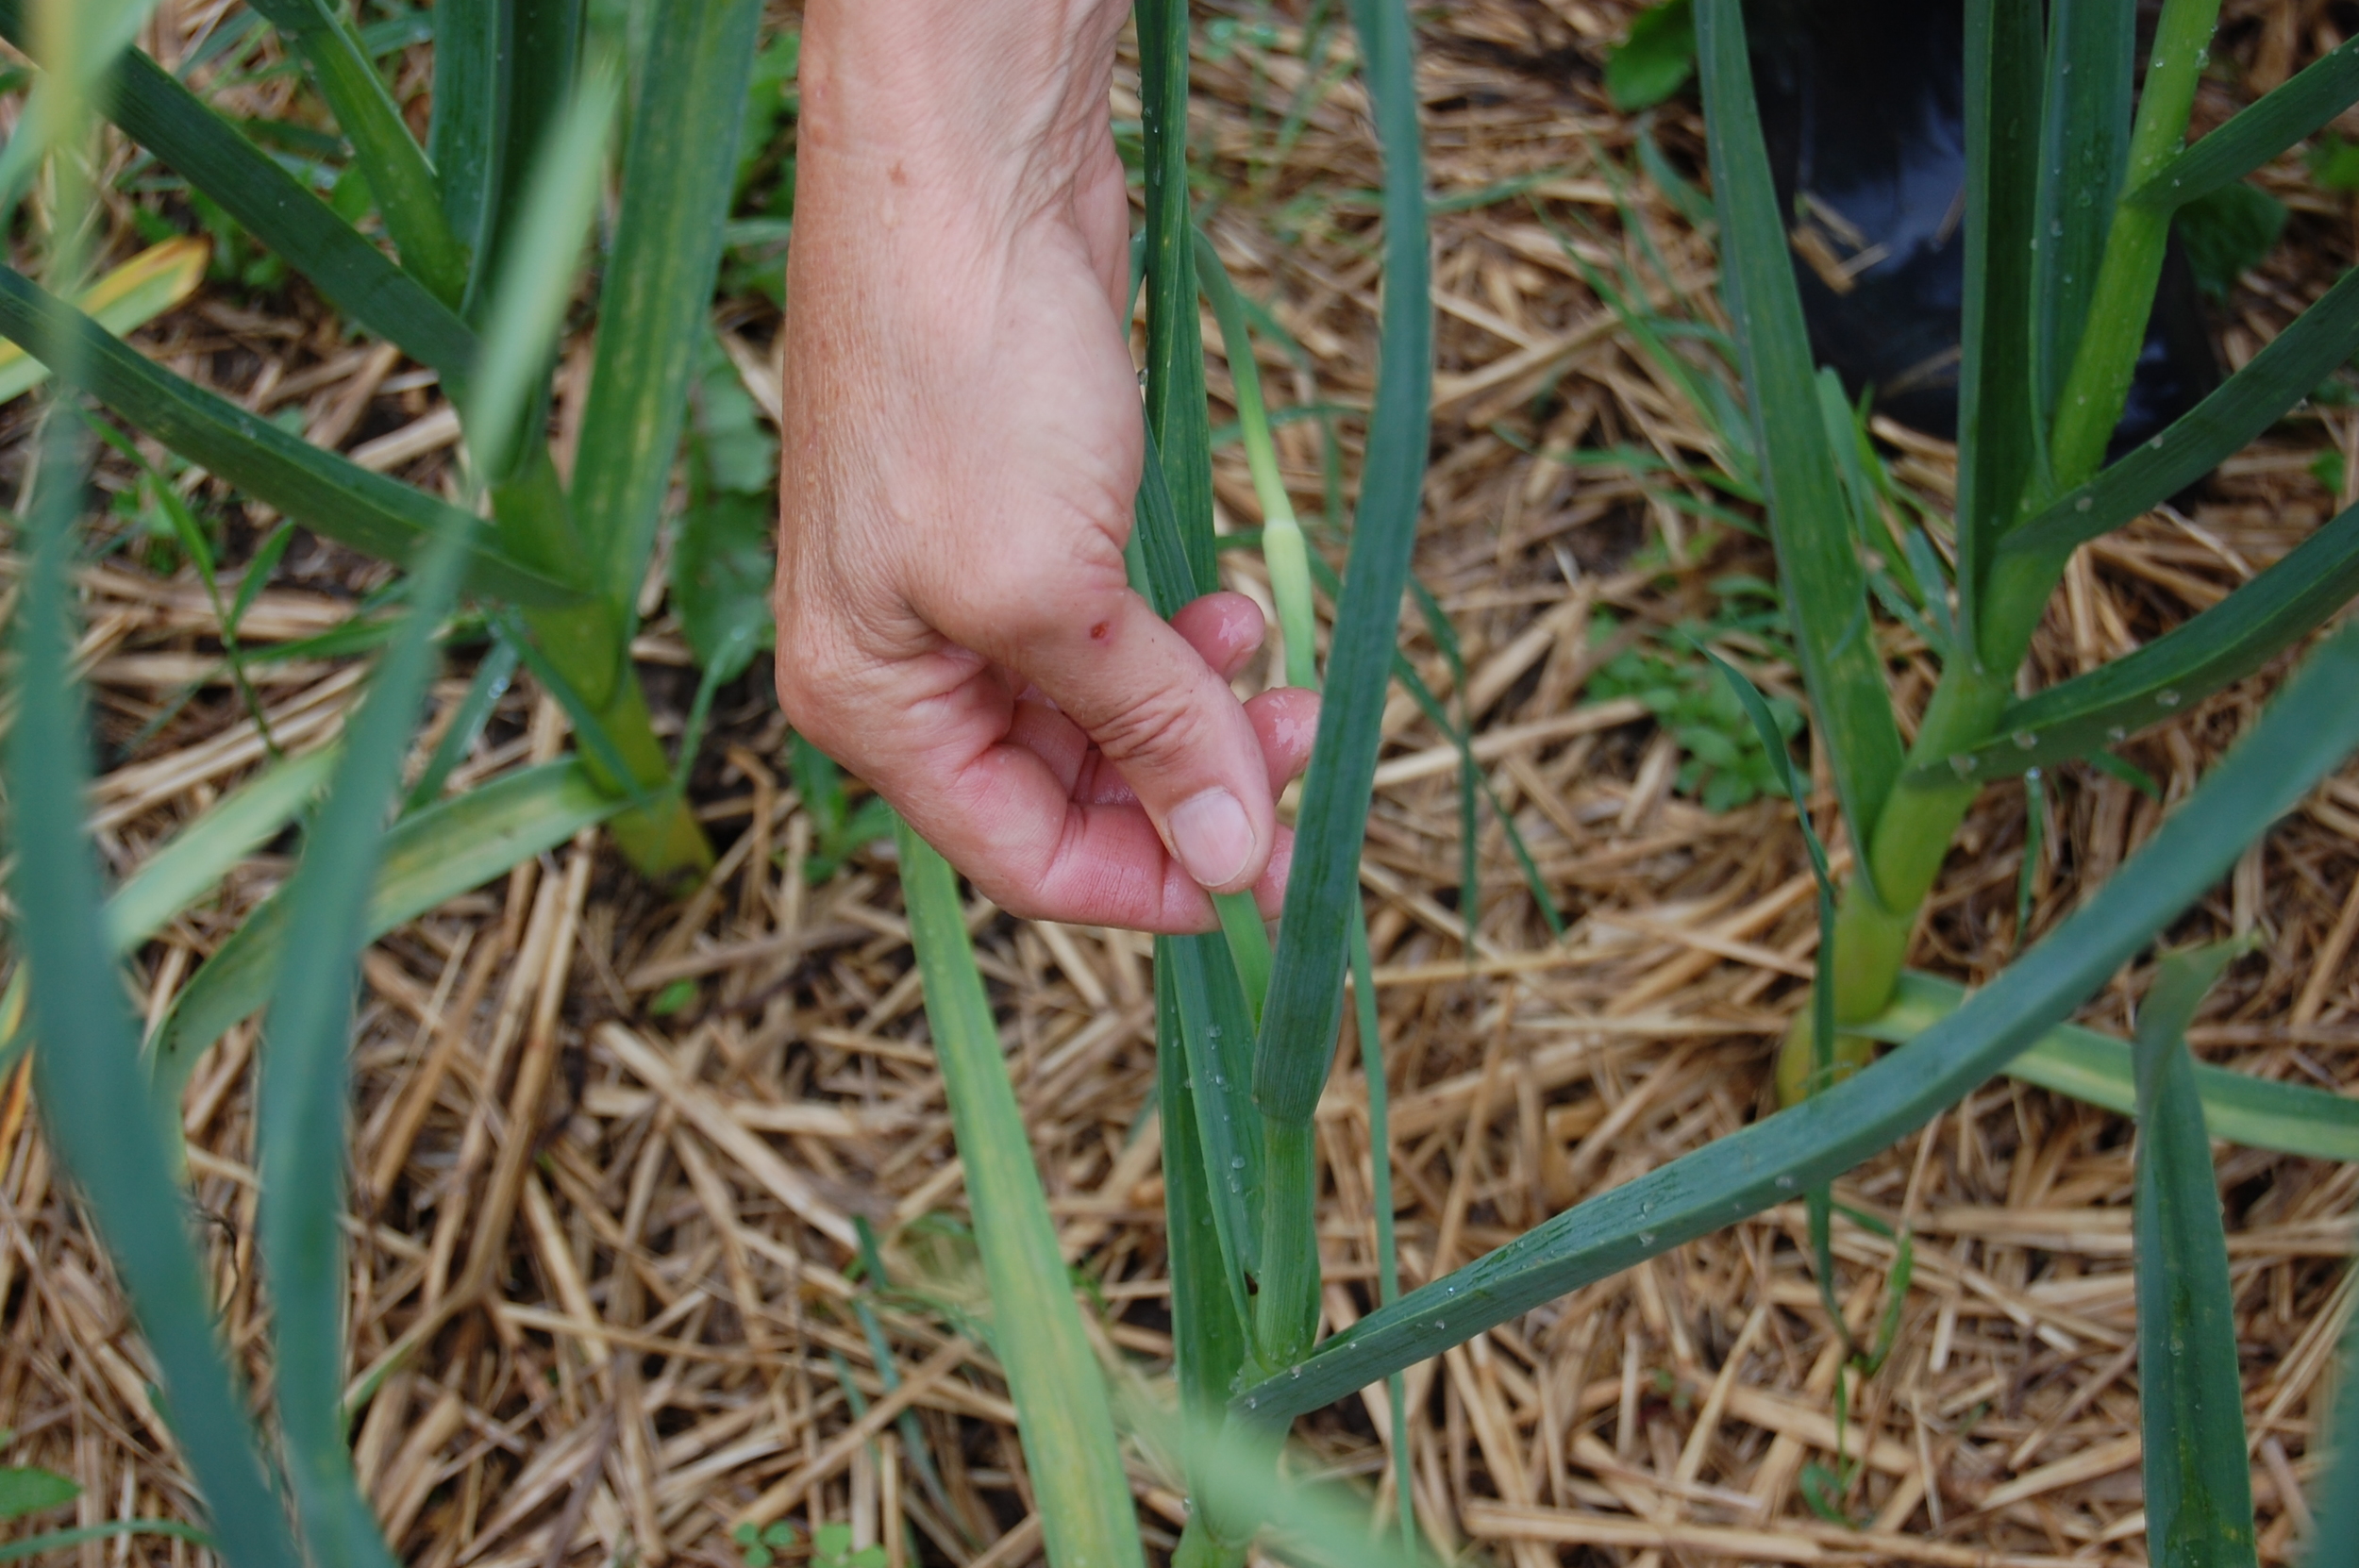    Scapes    are the curly center stems that often form as garlic matures.    
  
 
  
   Cut or break them off after they are 10" long—they will inhibit bulb growth if allowed to remain.    
  
 Normal 
 0 
 
 
 
 
 false 
 false 
 false 
 
 EN-US 
